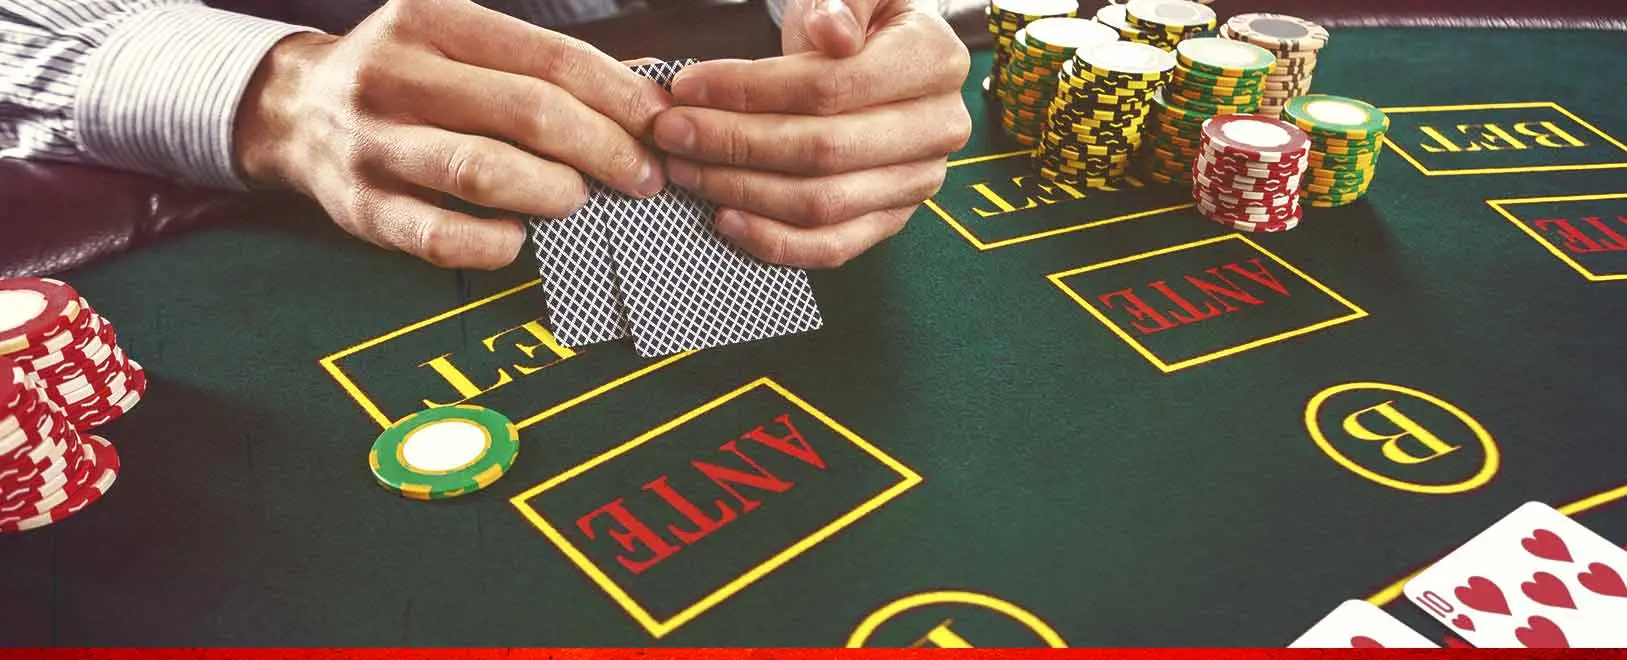 How to play poker guide